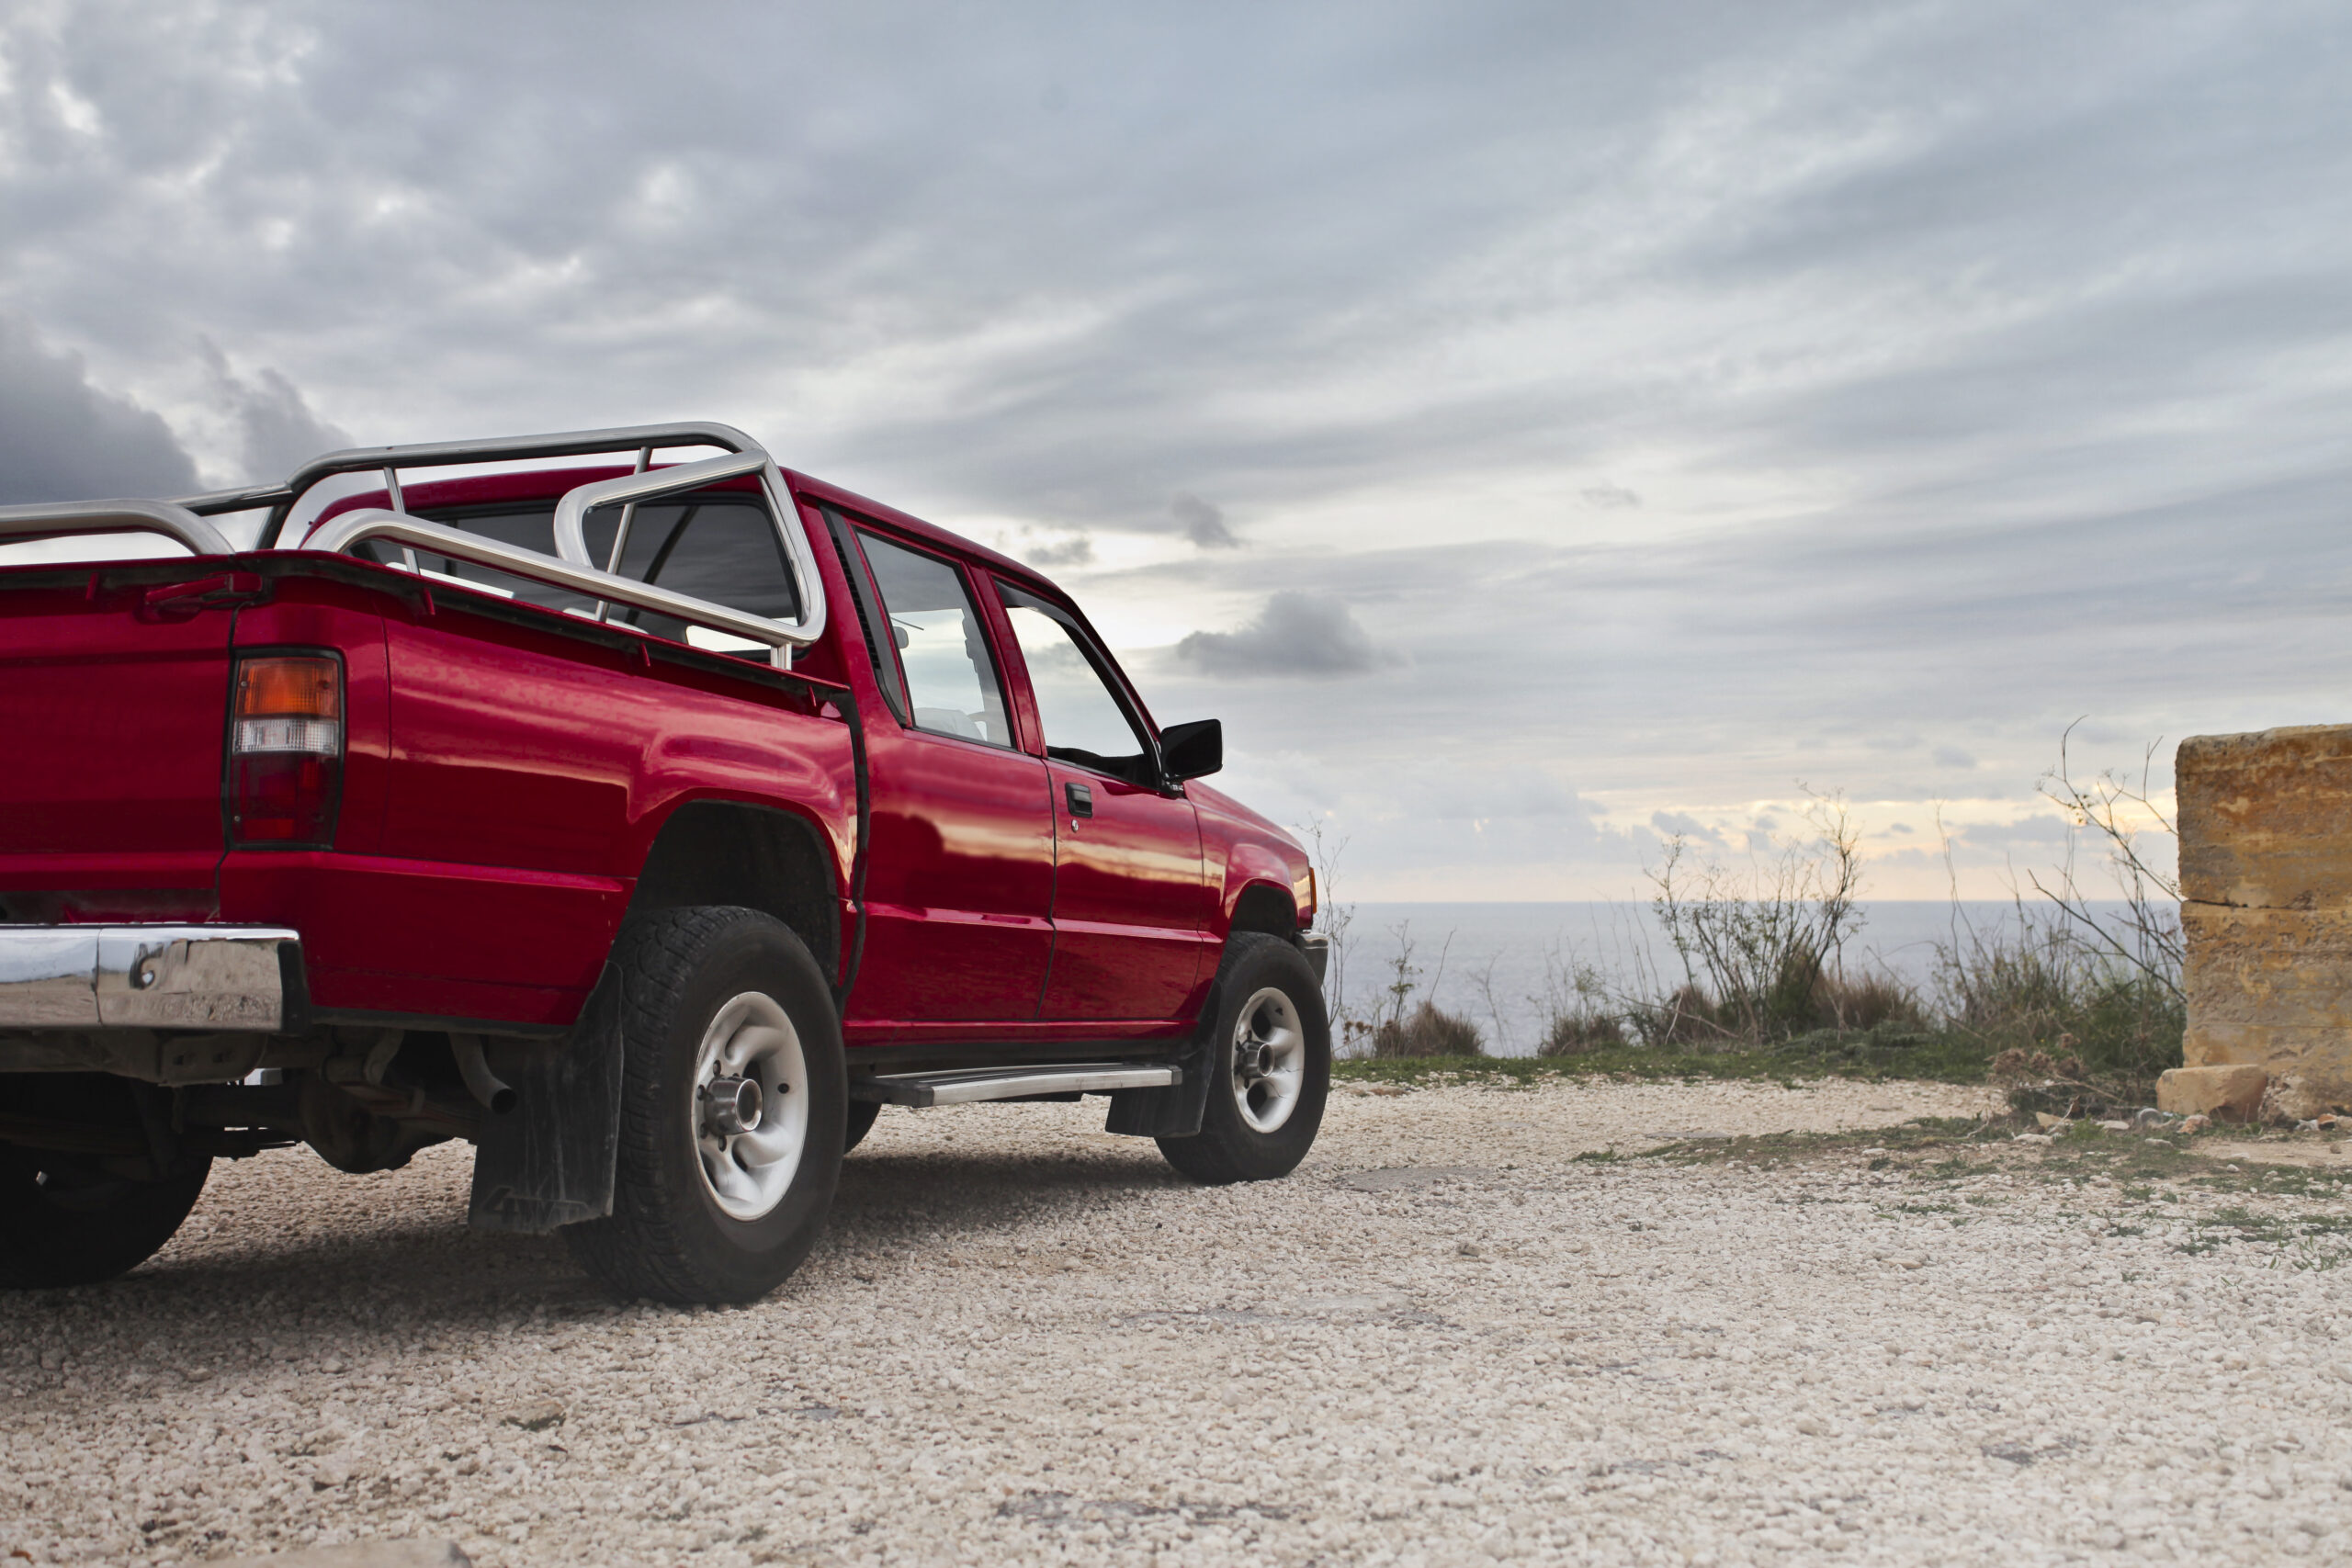 The Top Accessories for Your Pickup Truck